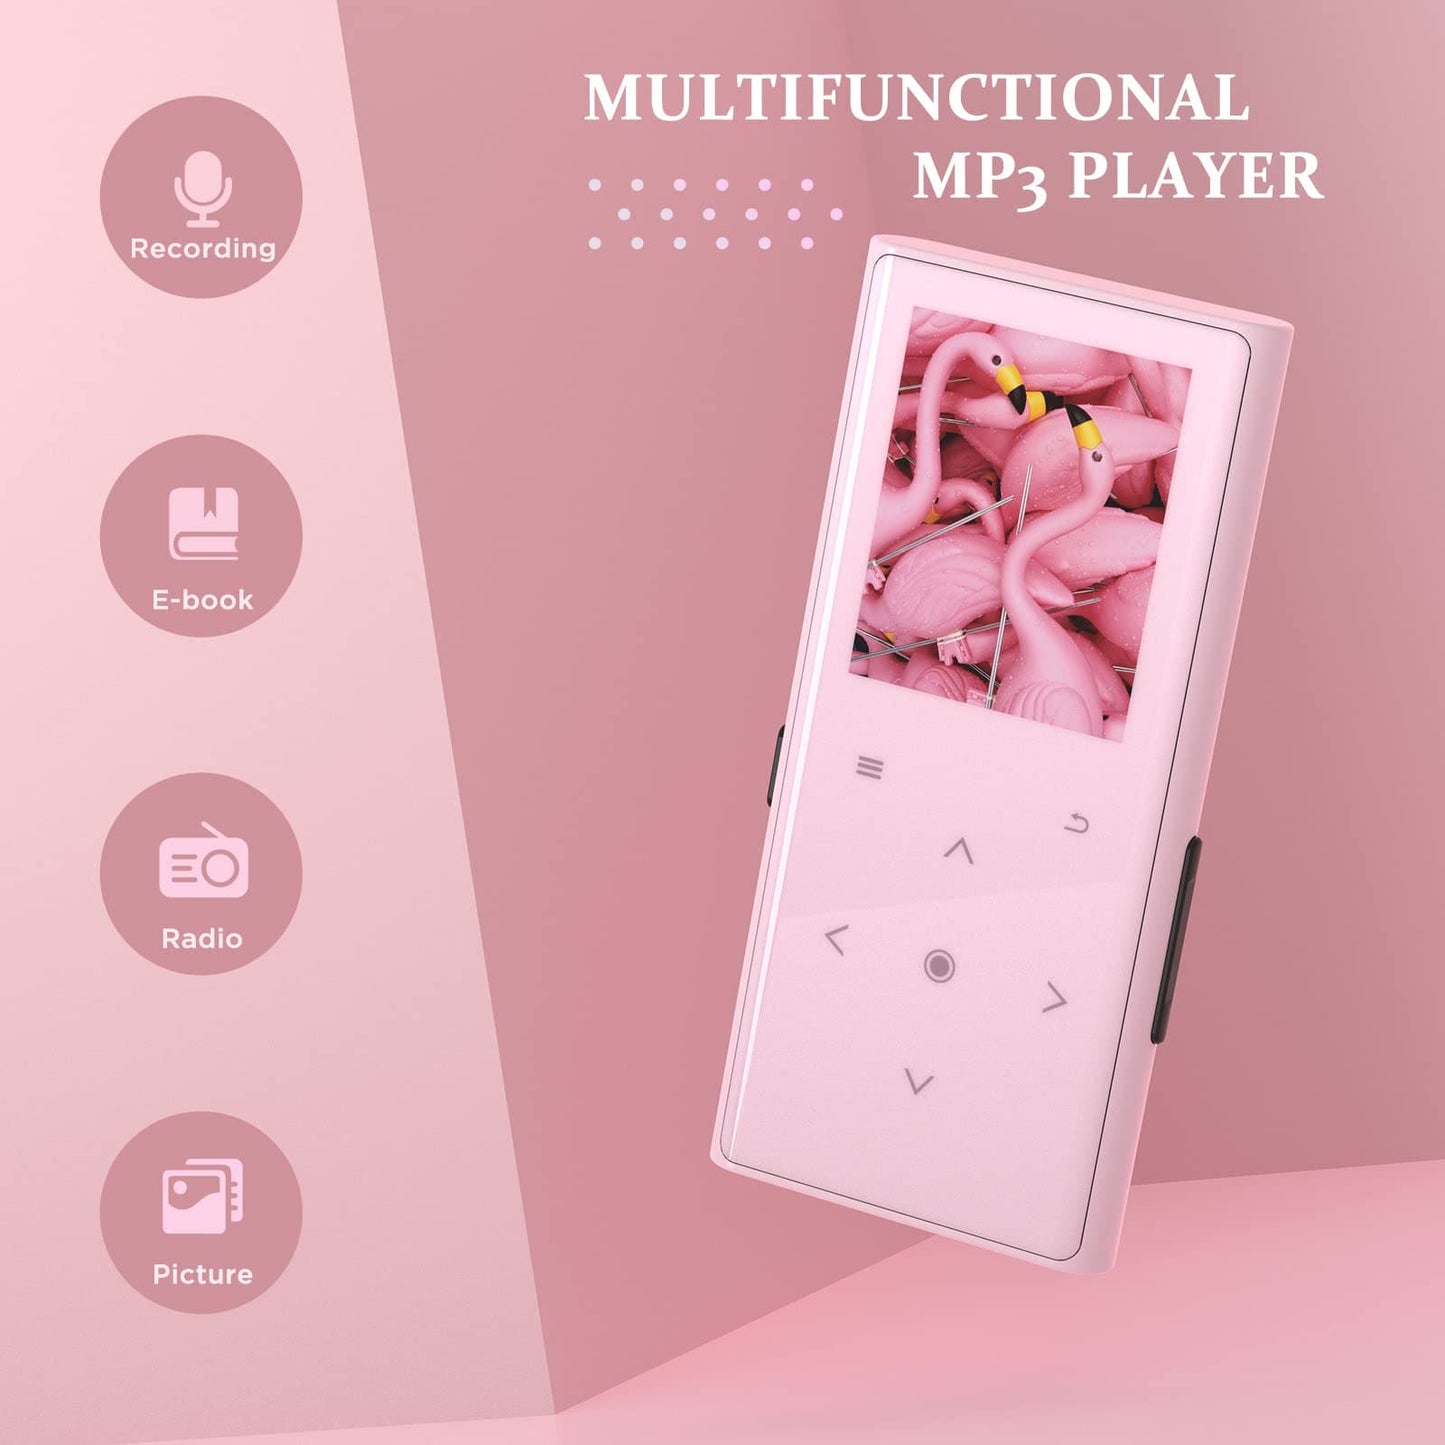 128GB Mp3 Player with Bluetooth 5.2,COCONISE Music Player with Speaker Hi-Fi Lossless Sound Quality, with FM Radio, Voice Recording, E-Book Function,Super Light Perfect for Running